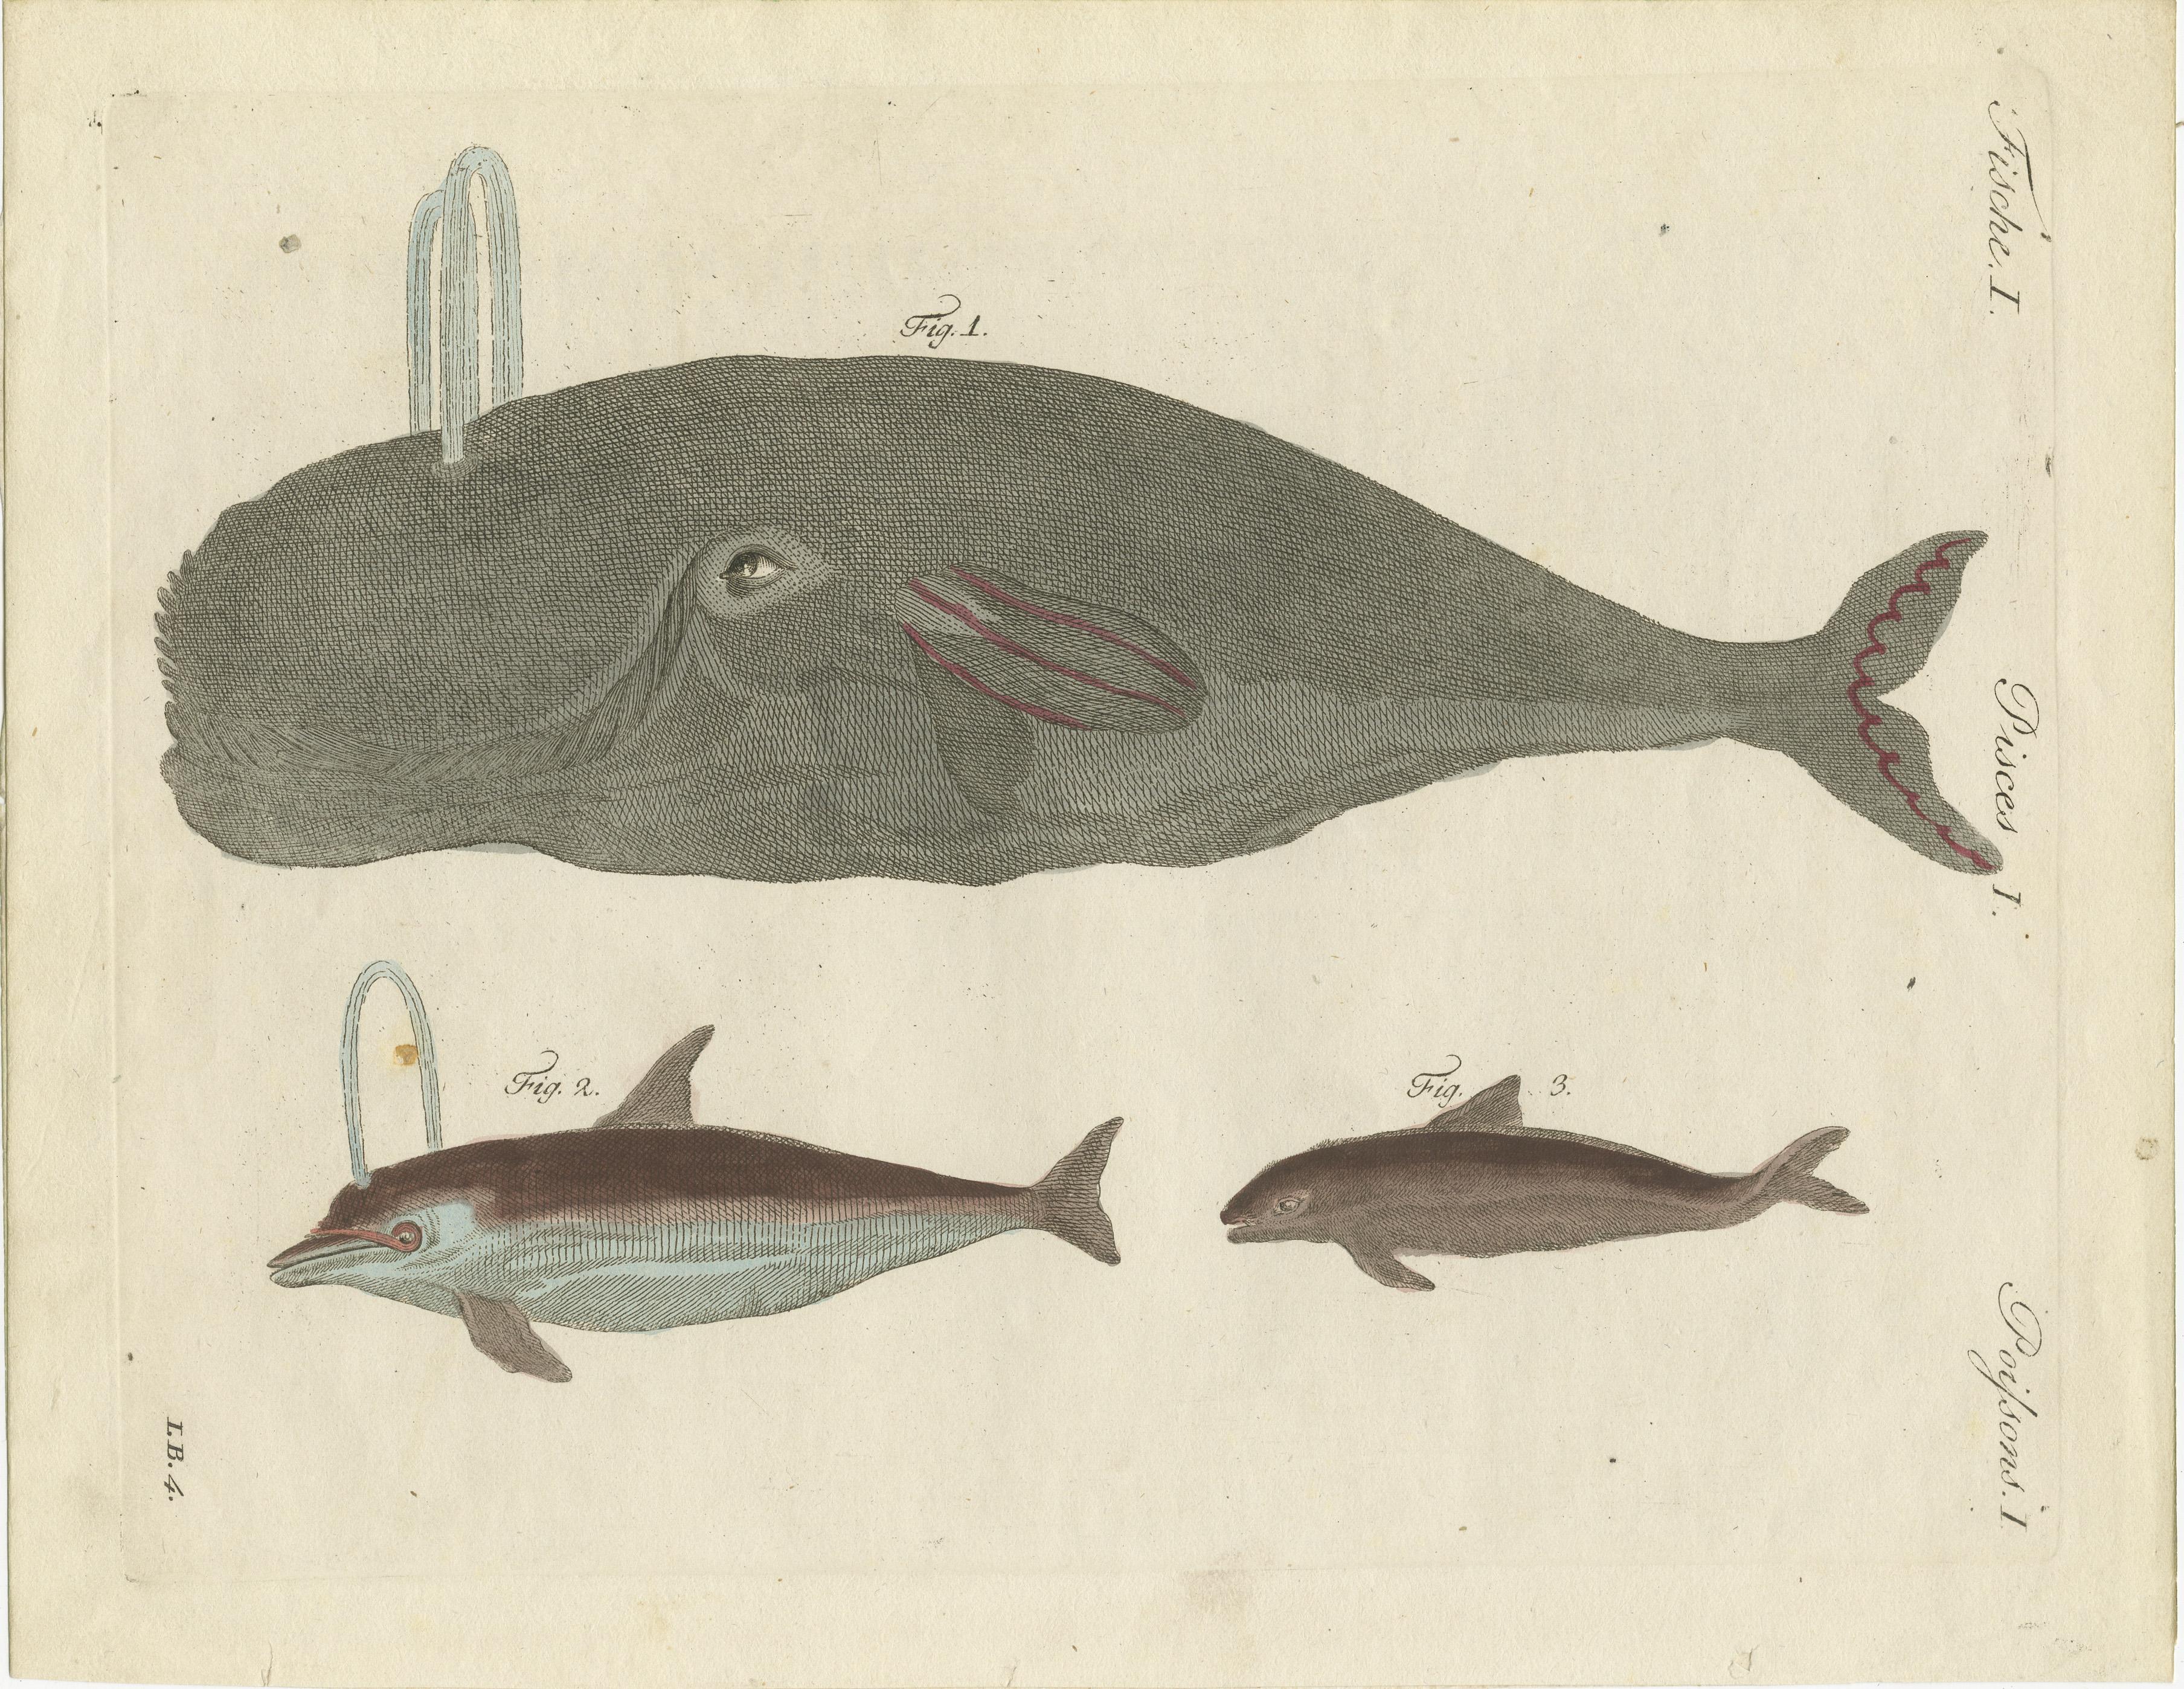 Bowhead whale, Balaena mysticetus 1, short-beaked common dolphin, Delphinus delphis 2 and porpoise, Phocoena phocoena 3. Source unknown, to be determined. Most likely published by or after Bertuch, circa 1795.